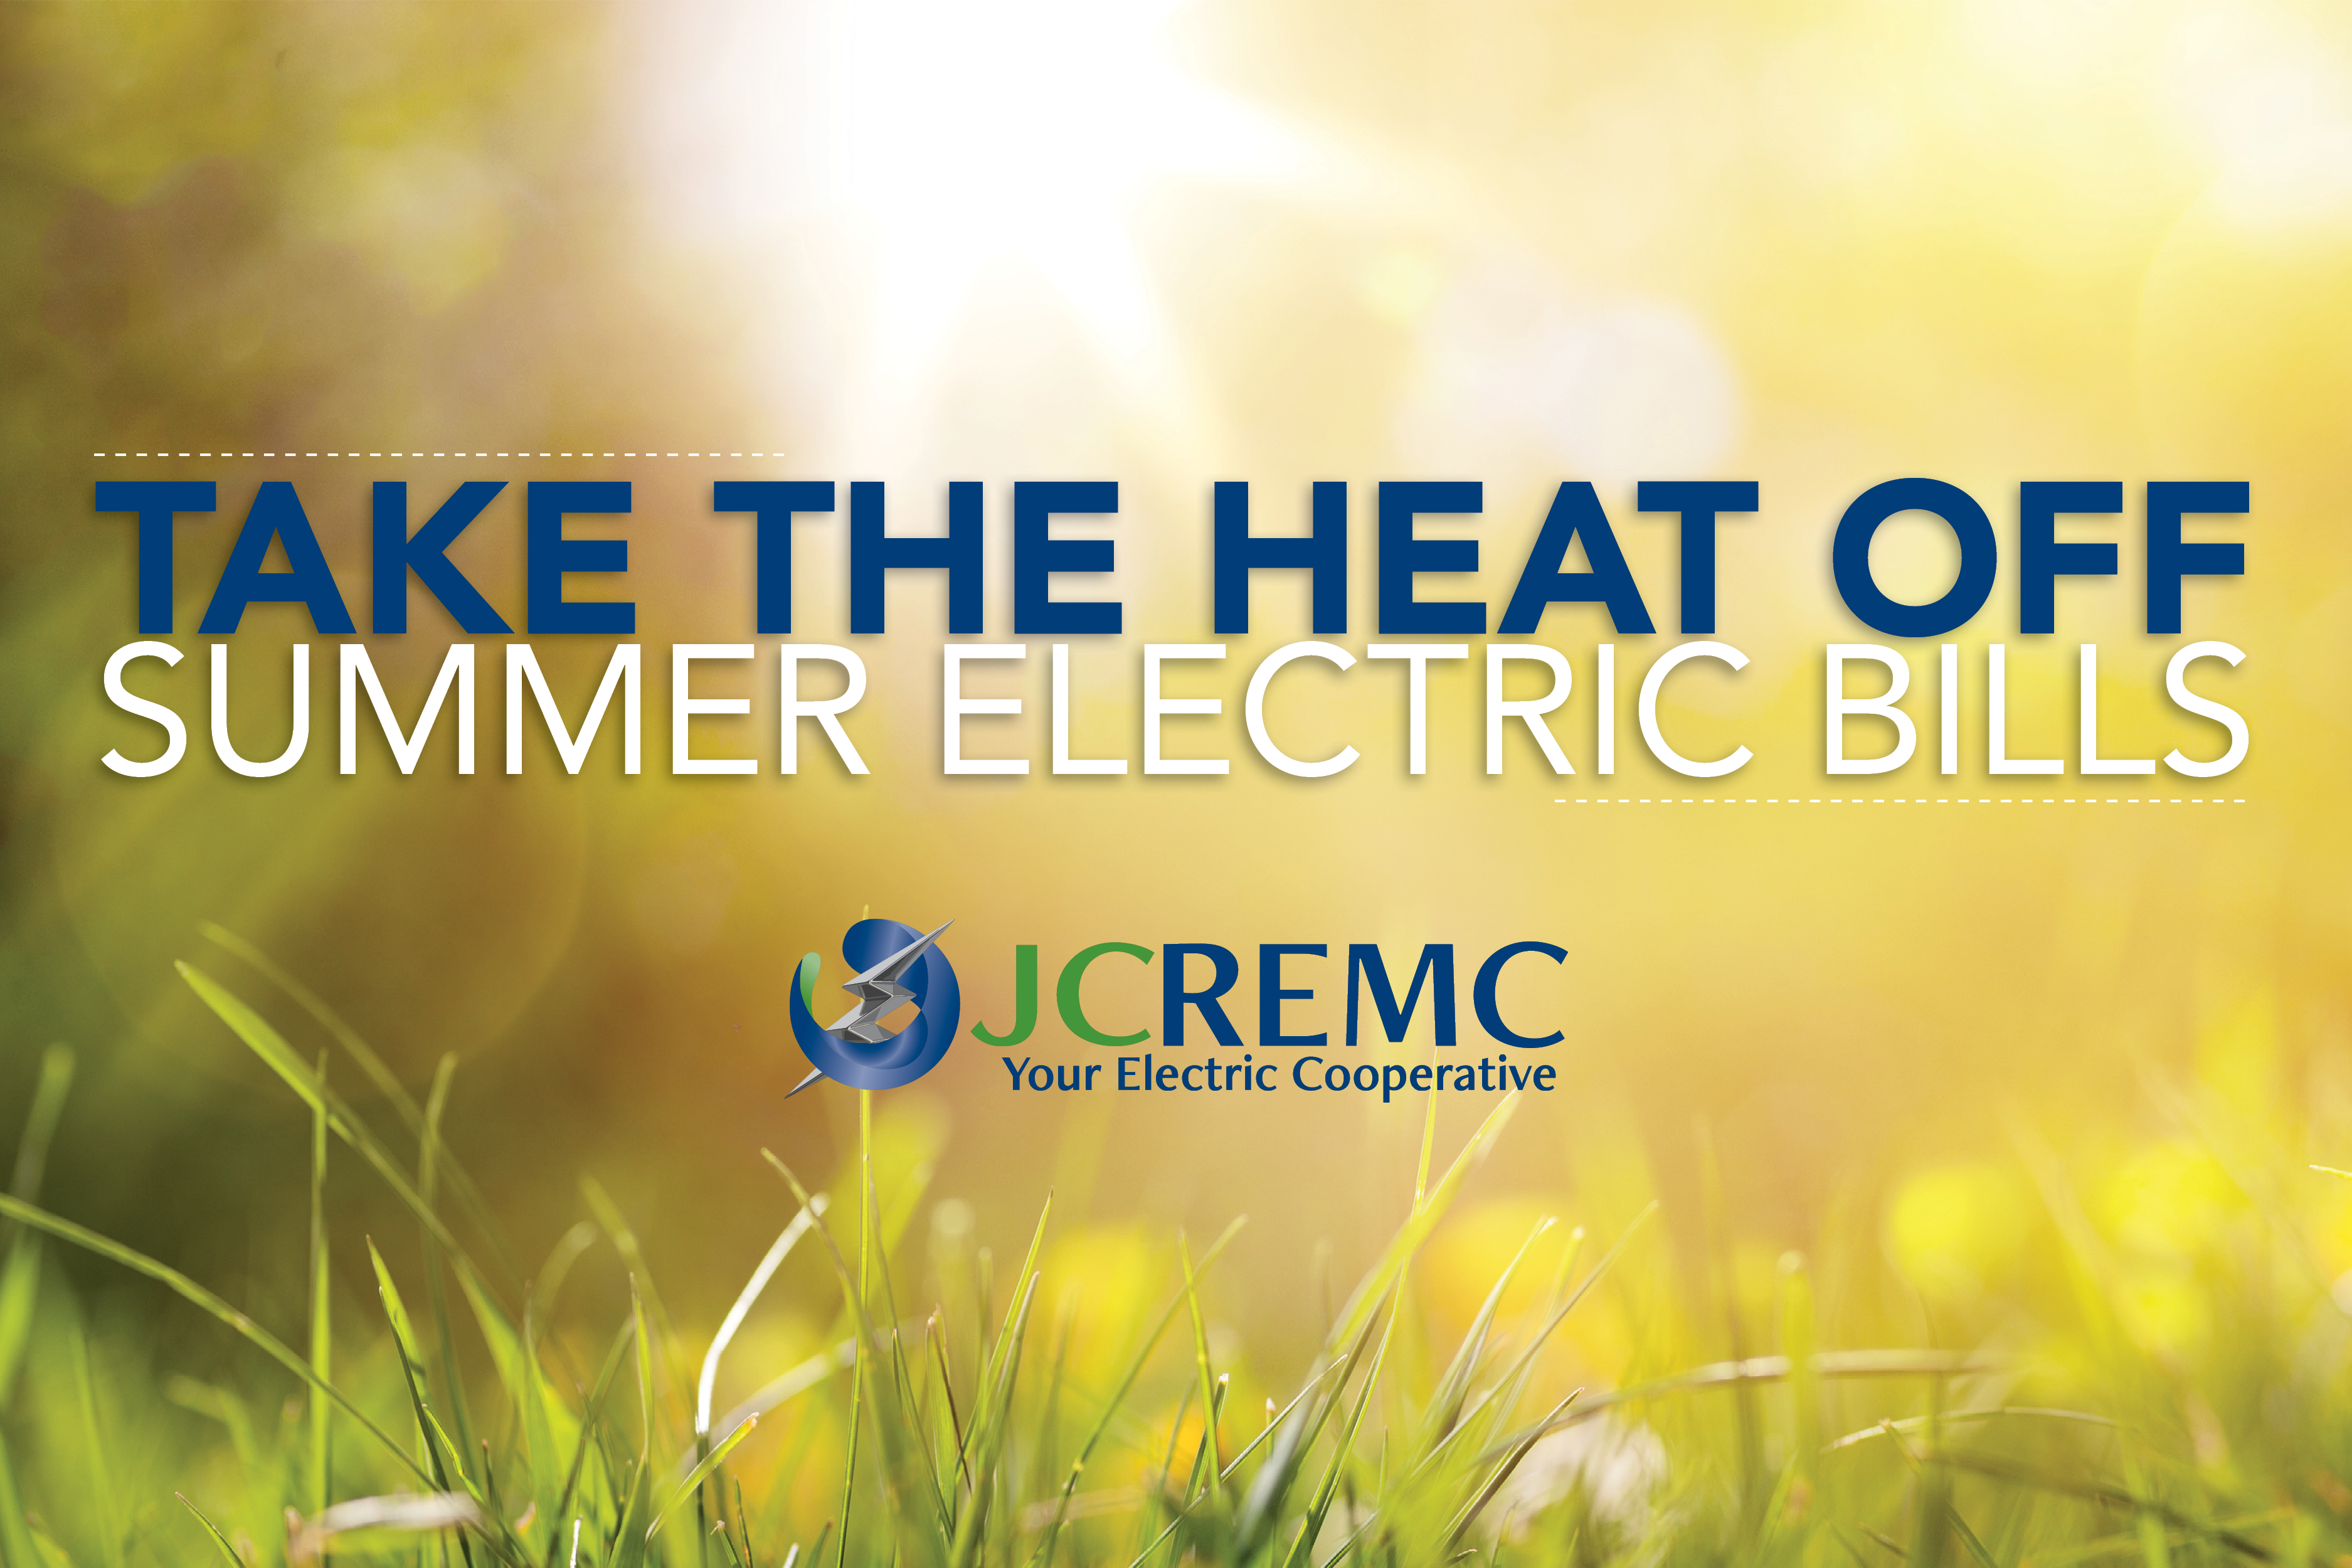 5 Ways to Take the Heat Off Summer Electric Bills